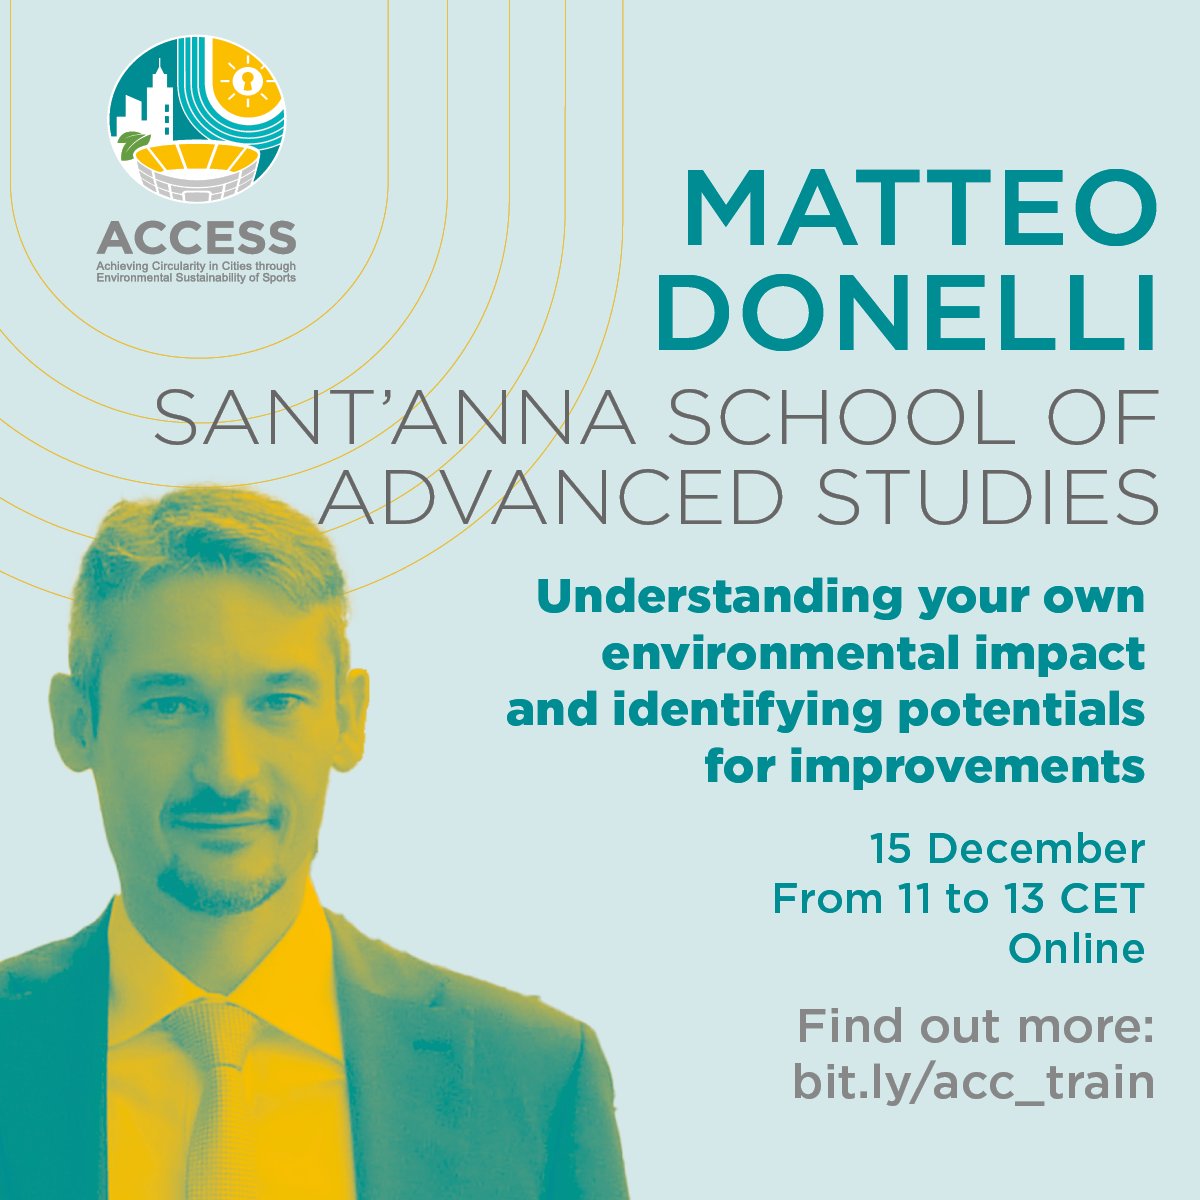 Matteo Donelli of @SantAnnaPisa and @Unibocconi will be joining the webinar tomorrow to speak about #LifeCycleAnalysis and how to use it for assessing sports' environmental performance. Read more and register here: bit.ly/3Ti2Hz9